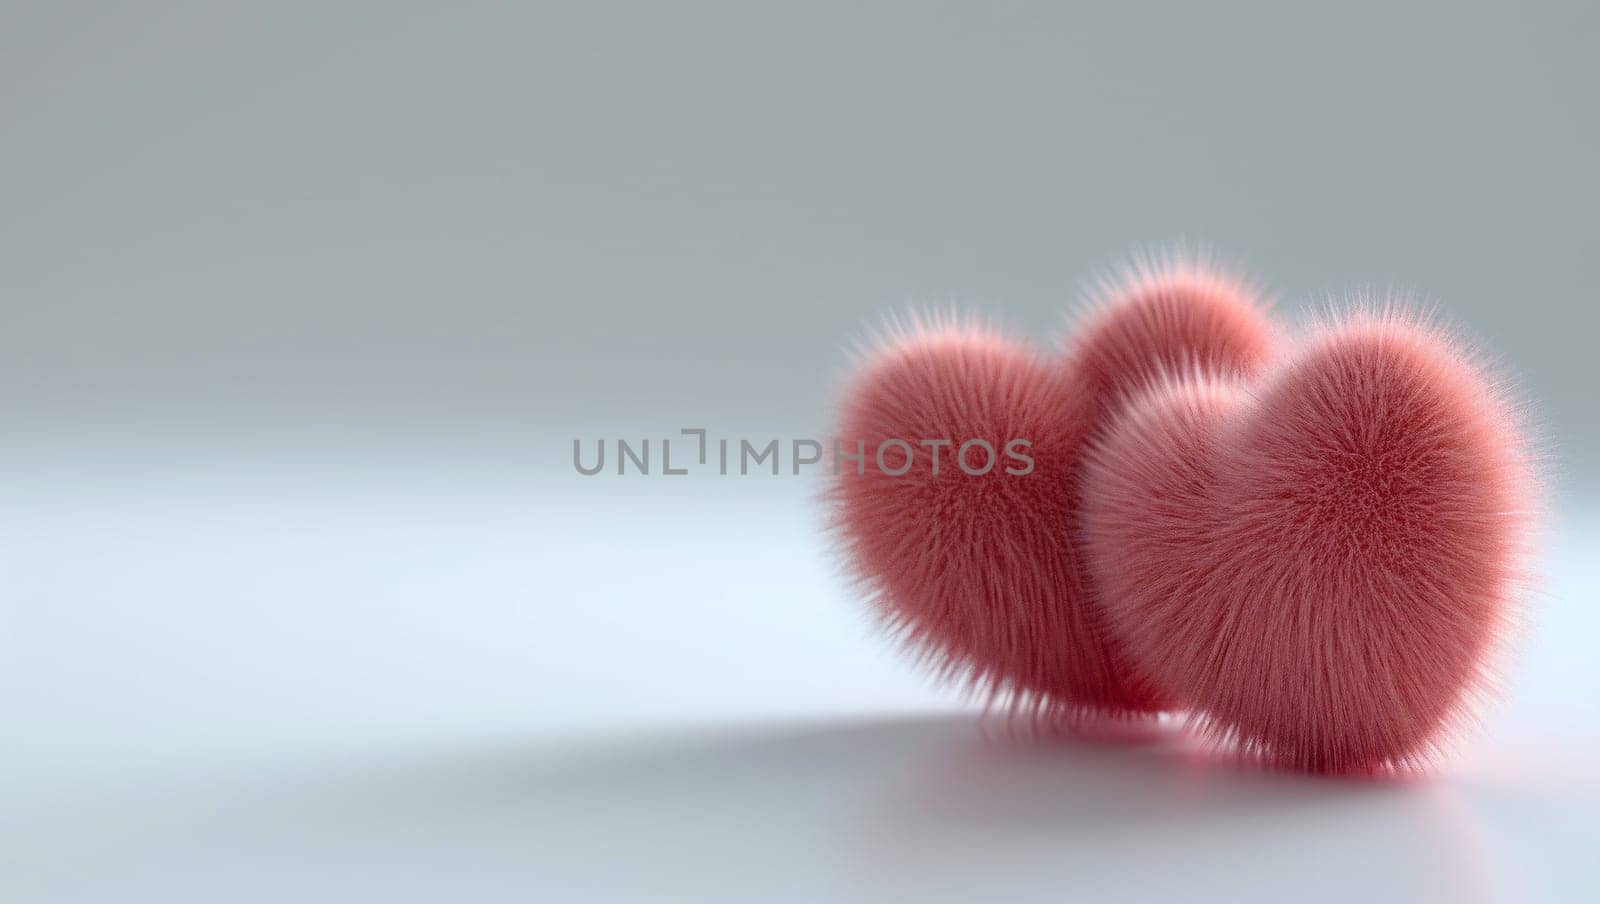 Several colorful fur hearts. Fur heart shapes on pink background, denoting love and care. Valentine's Day and donations. High quality photo